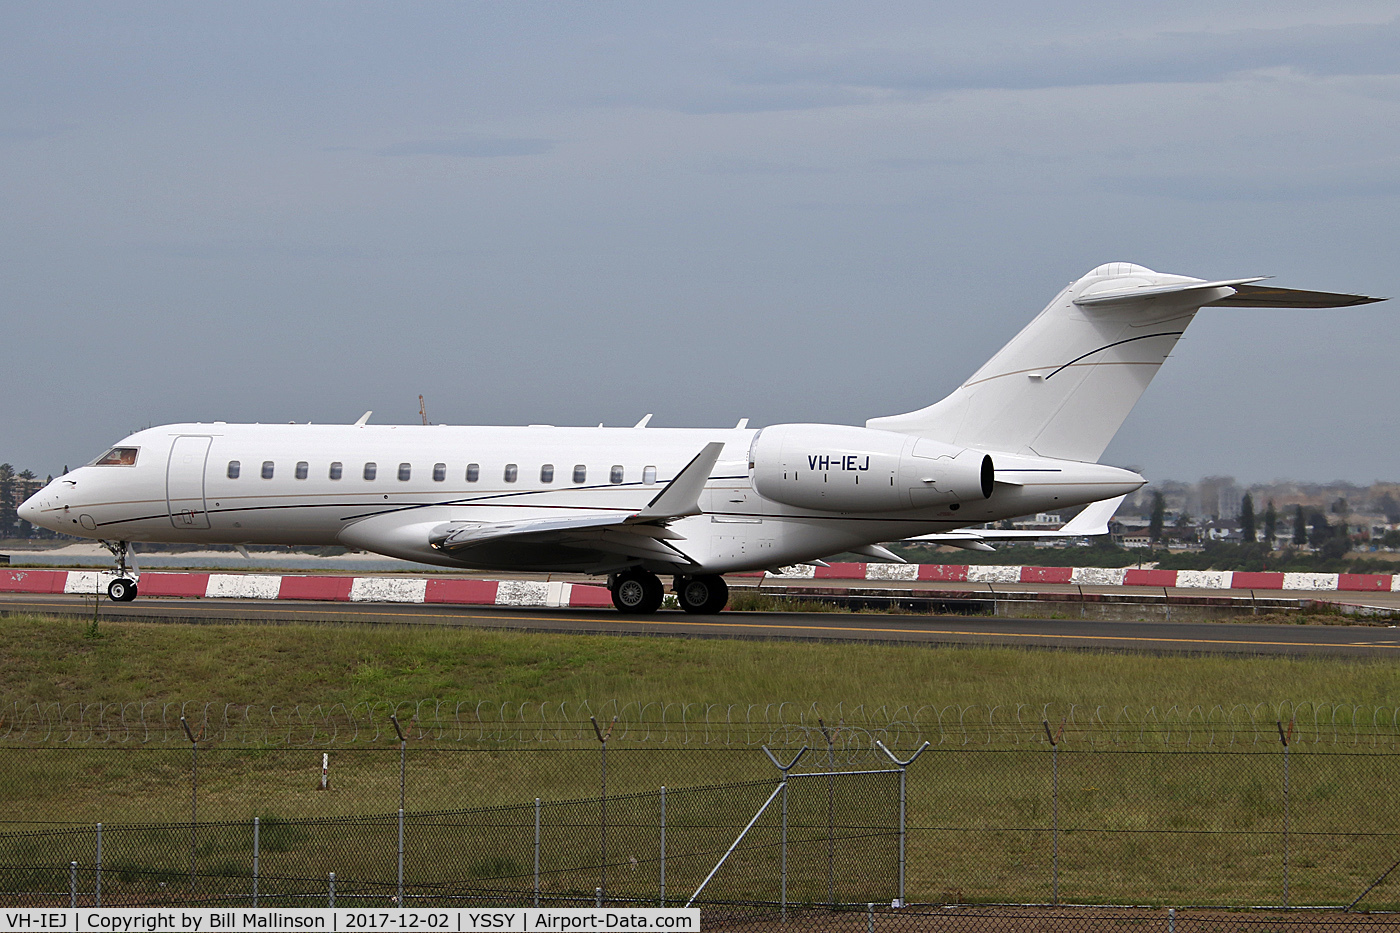 VH-IEJ, 2014 Bombardier BD-700-1A10 Global 6000 C/N 9680, taxiing